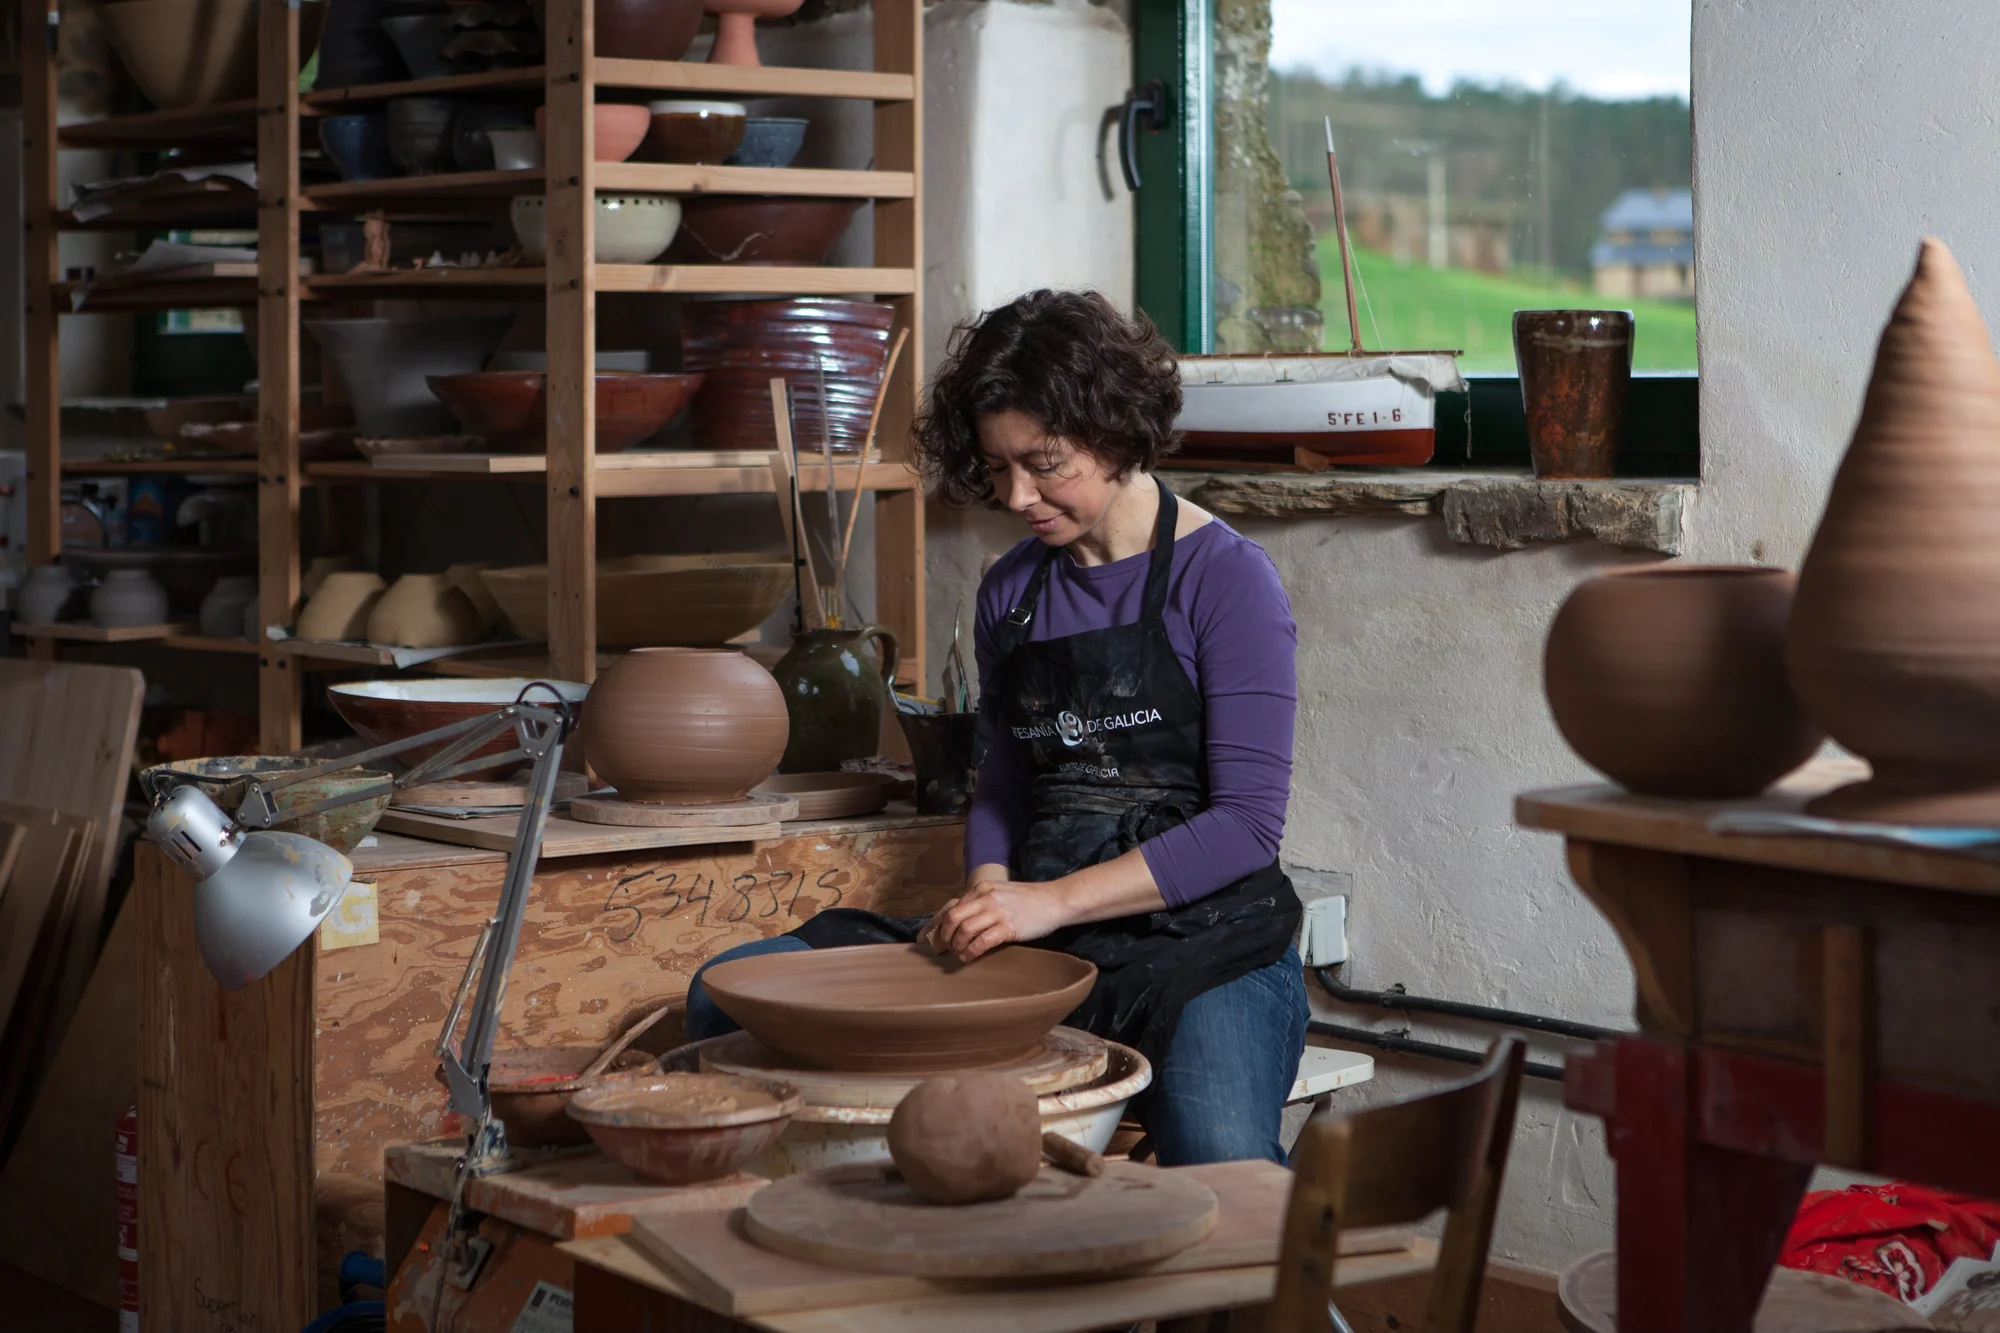 Photograph of a woman working on a pottery wheel, surrounded by ceramic pieces. There is a window in the background.